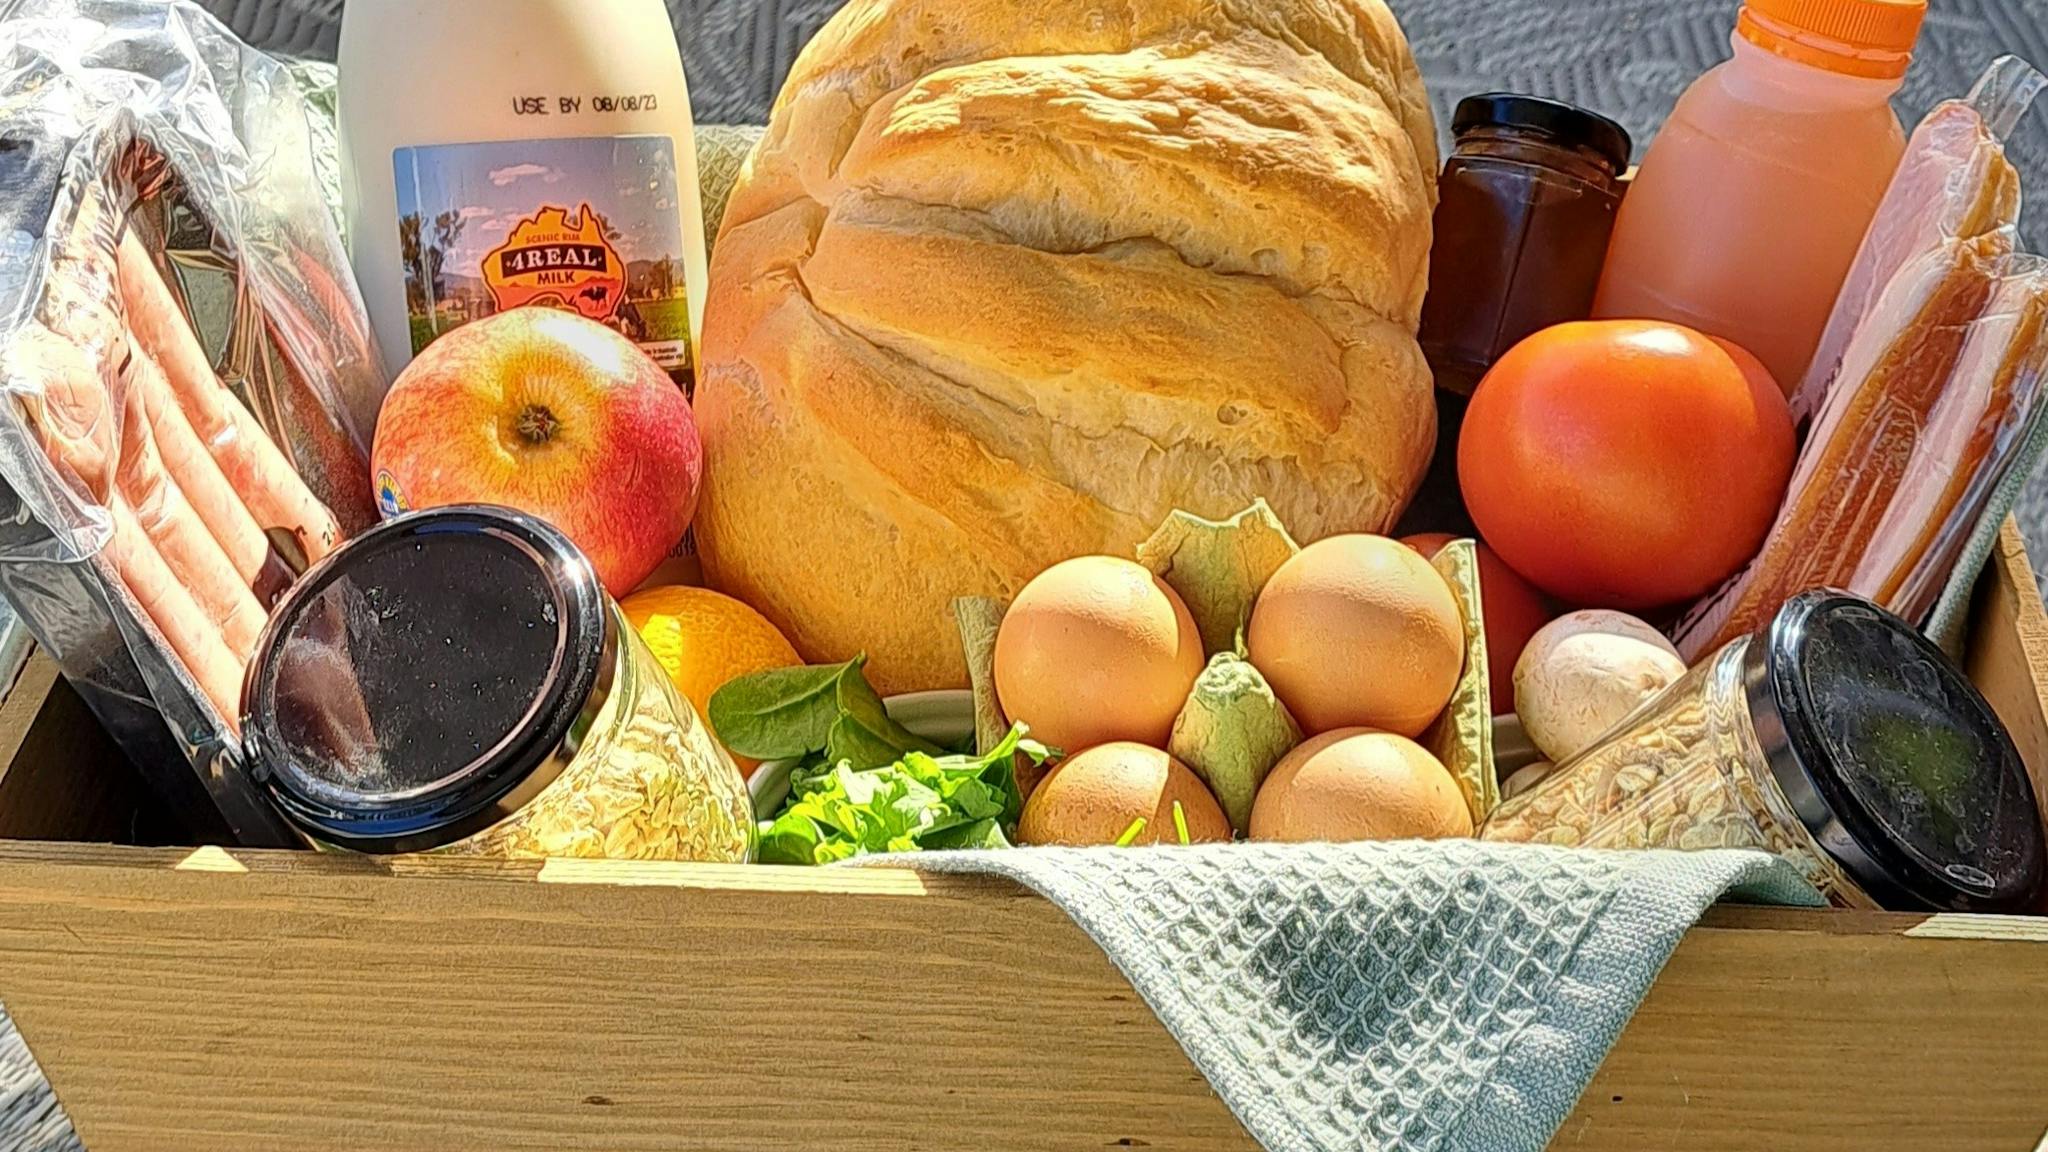 Breakfast hamper with local produce